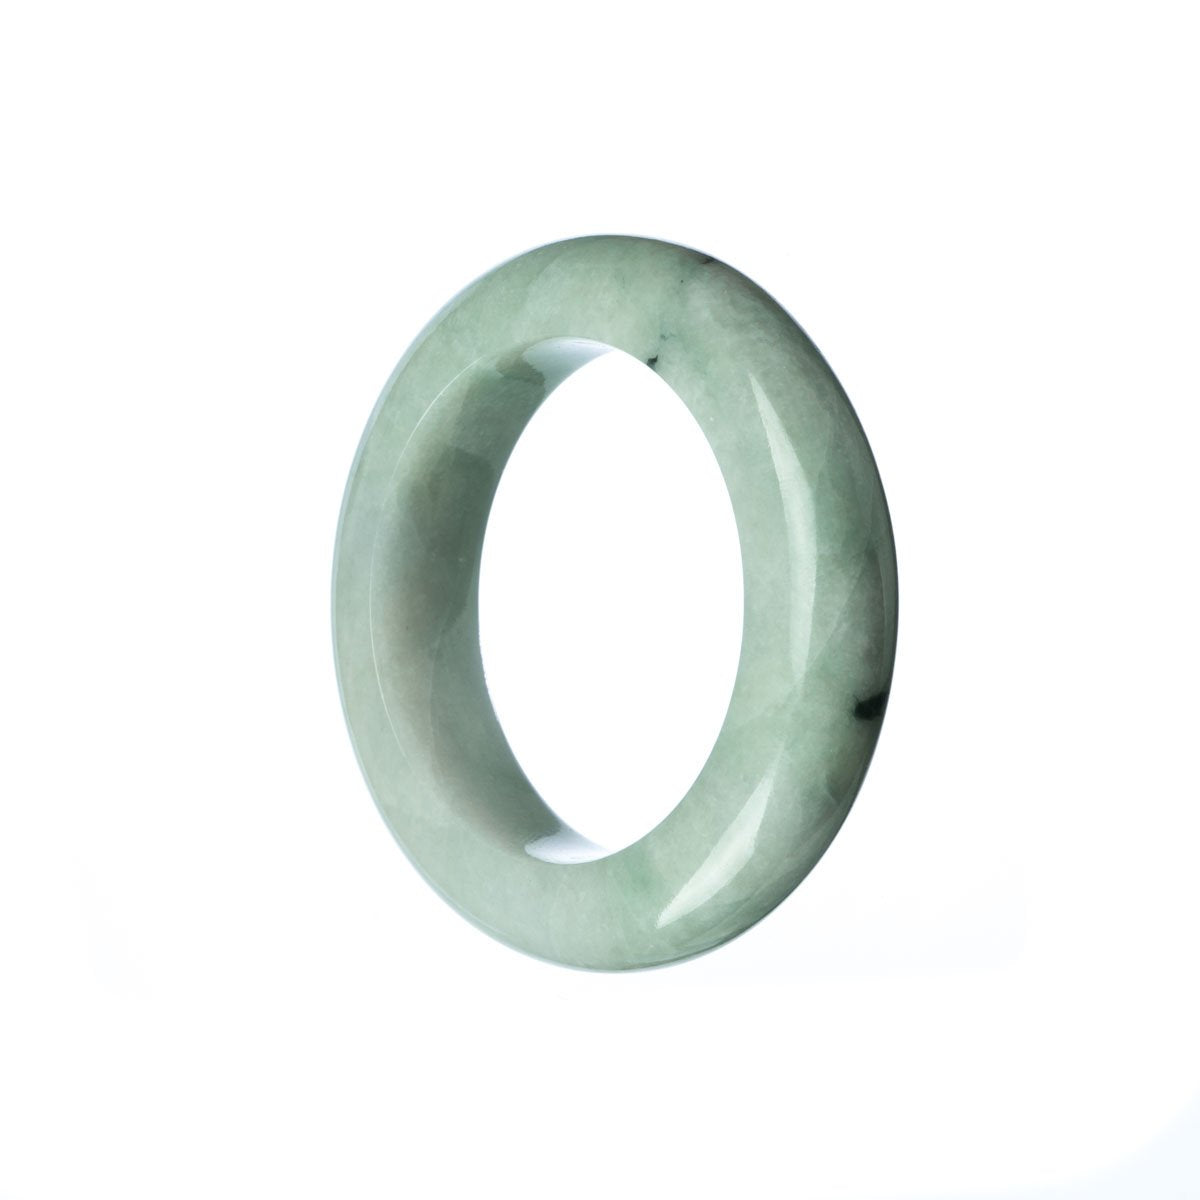 A close-up photo of a pale green jade bangle with a semi-round shape, suitable for a child. The bangle is made from genuine Grade A jadeite jade and is sold by MAYS.